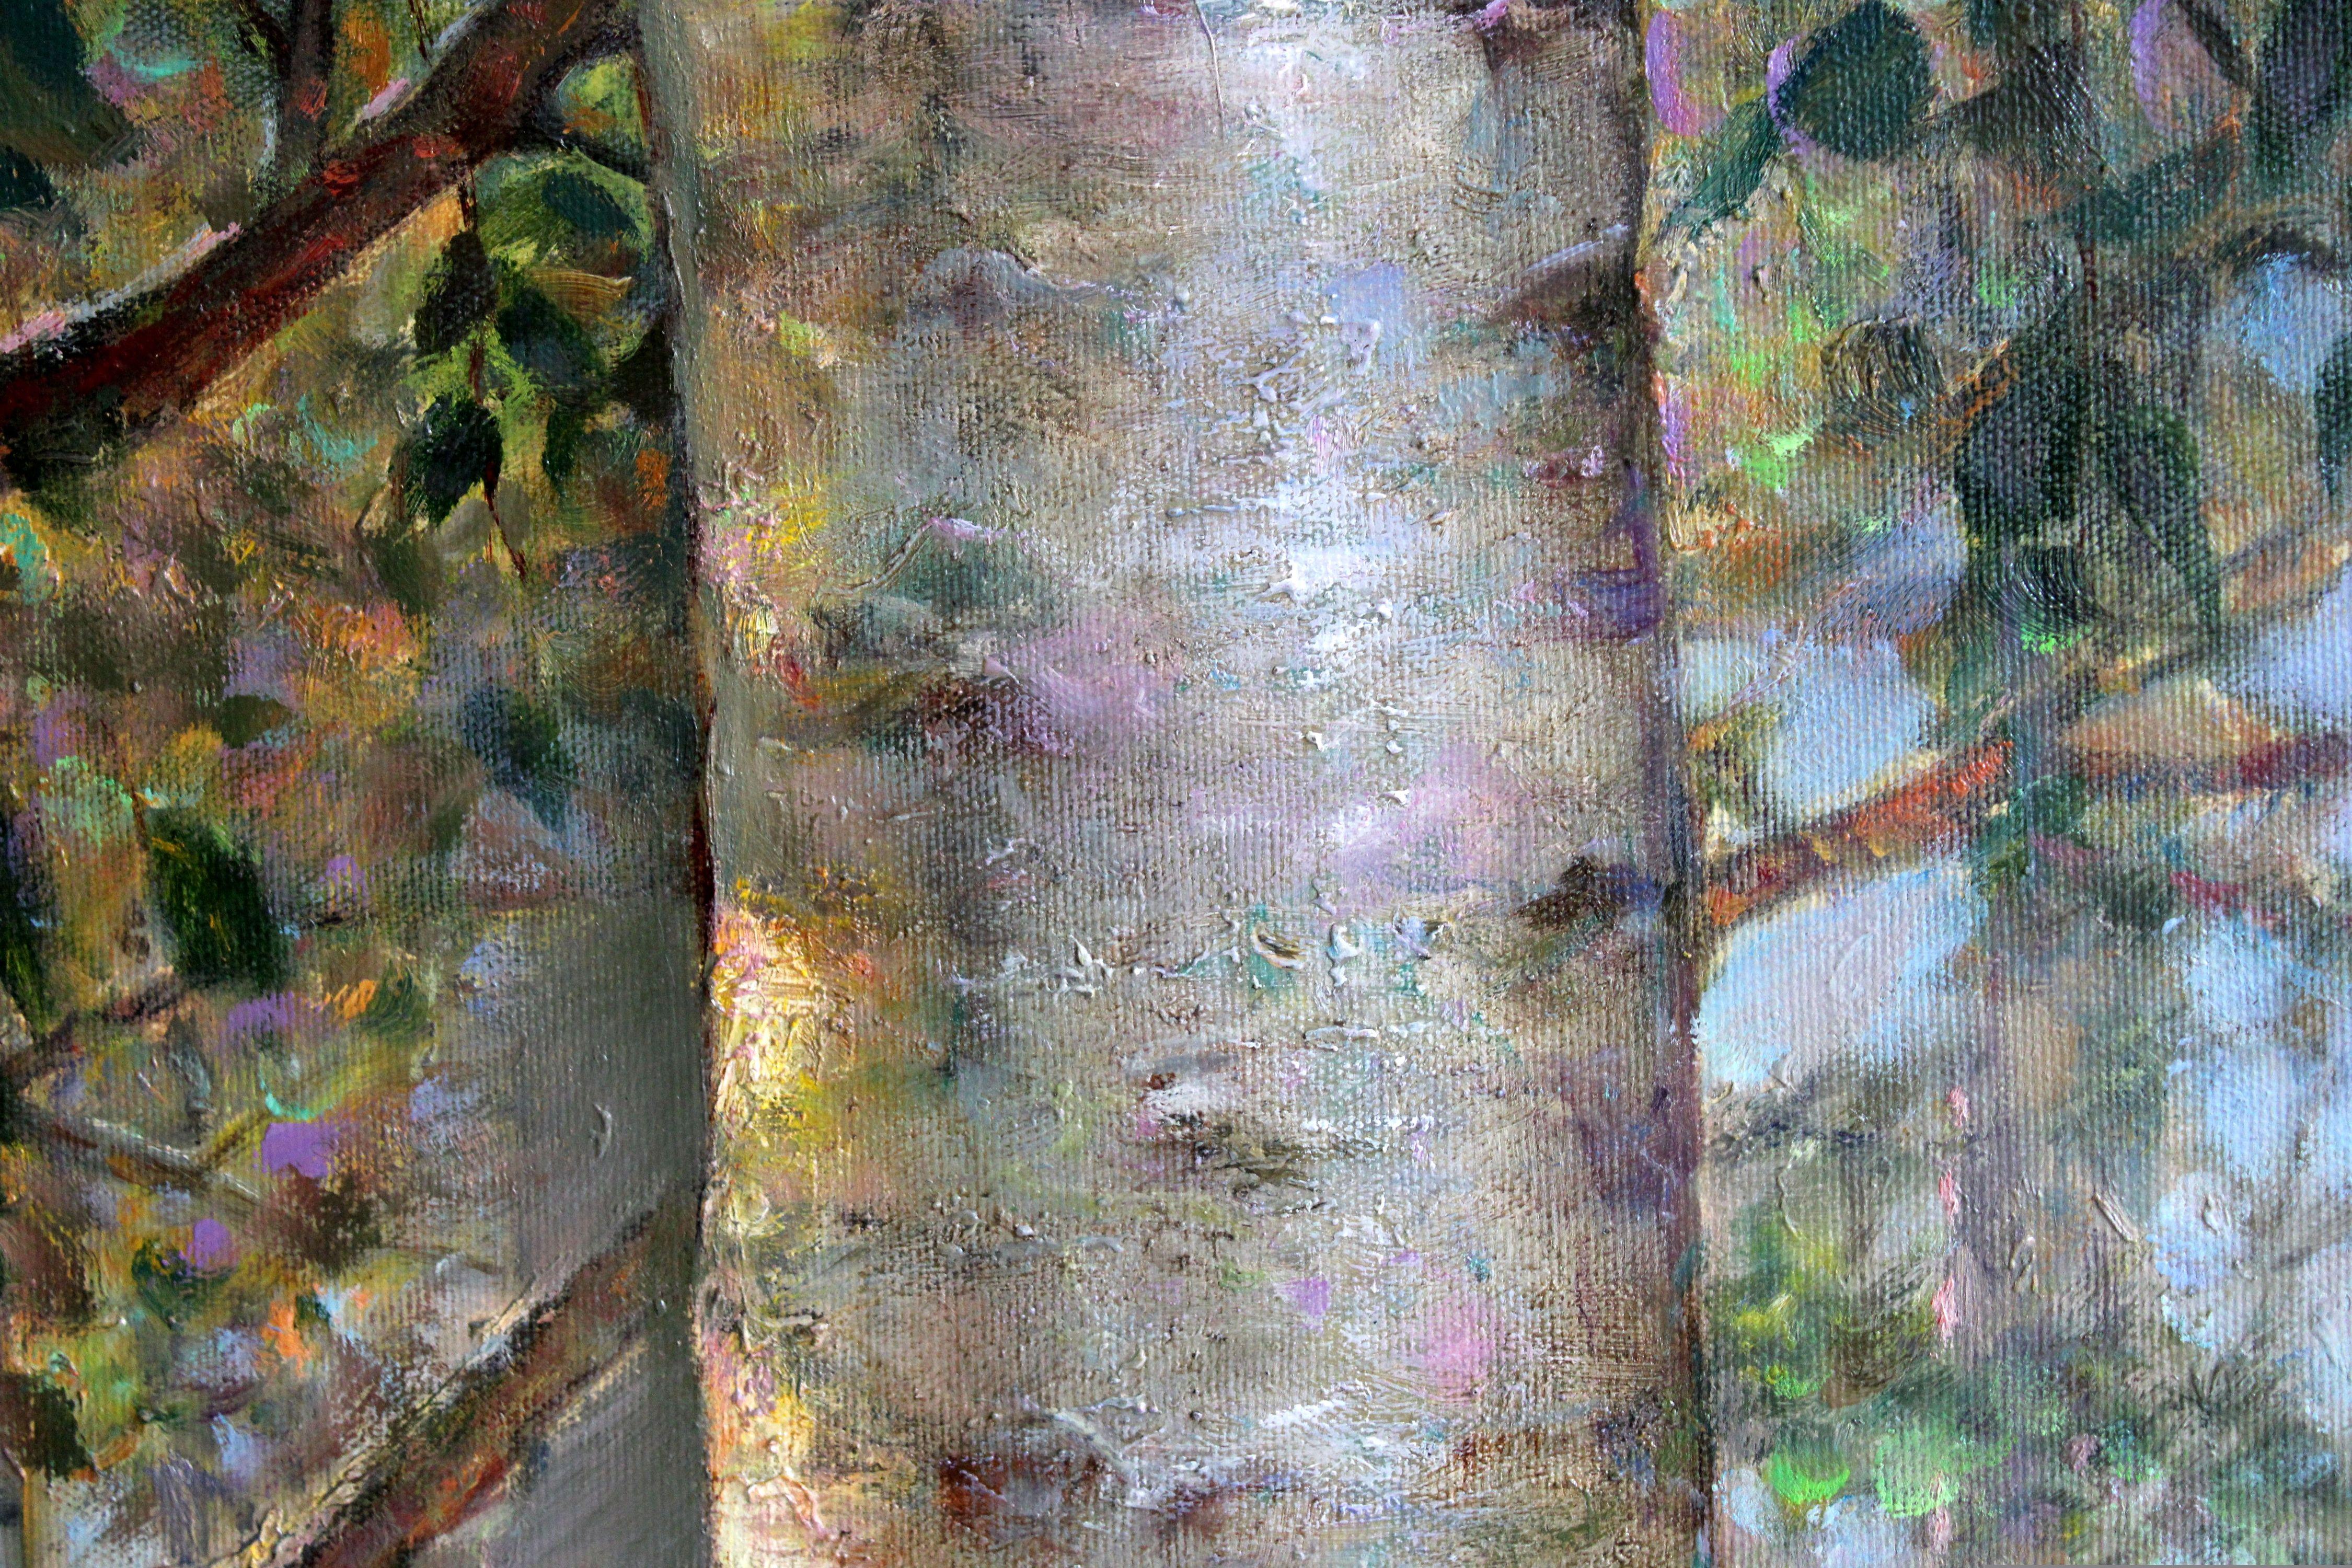 Landscape with birch trees. 2010, canvas, oil, 79x137 cm 2